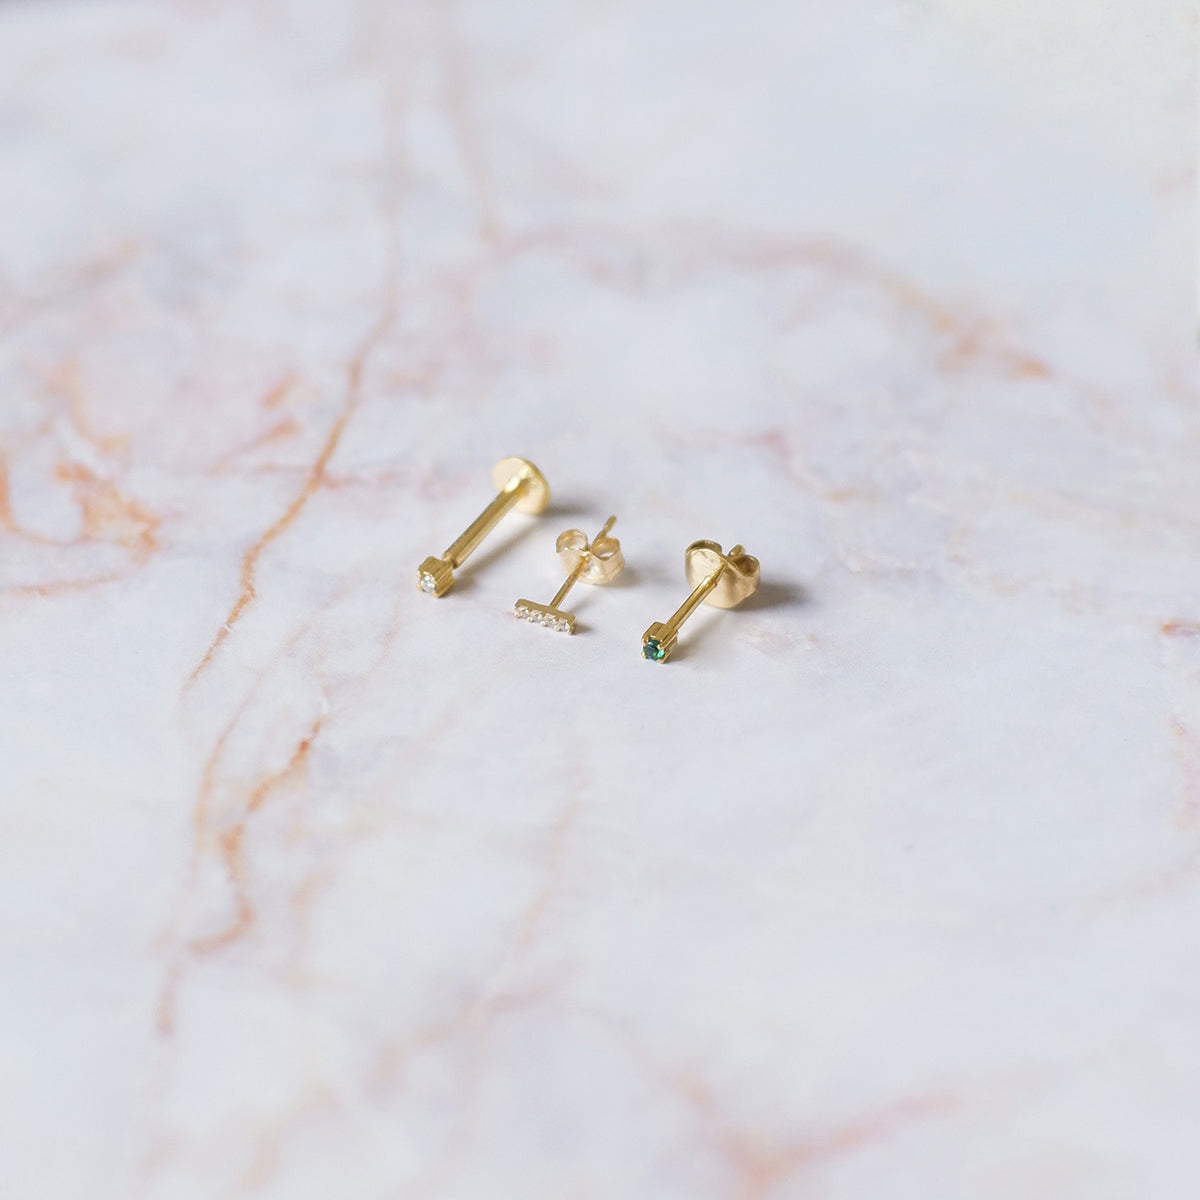 The (3mm) Birthstone Earrings in Solid Gold